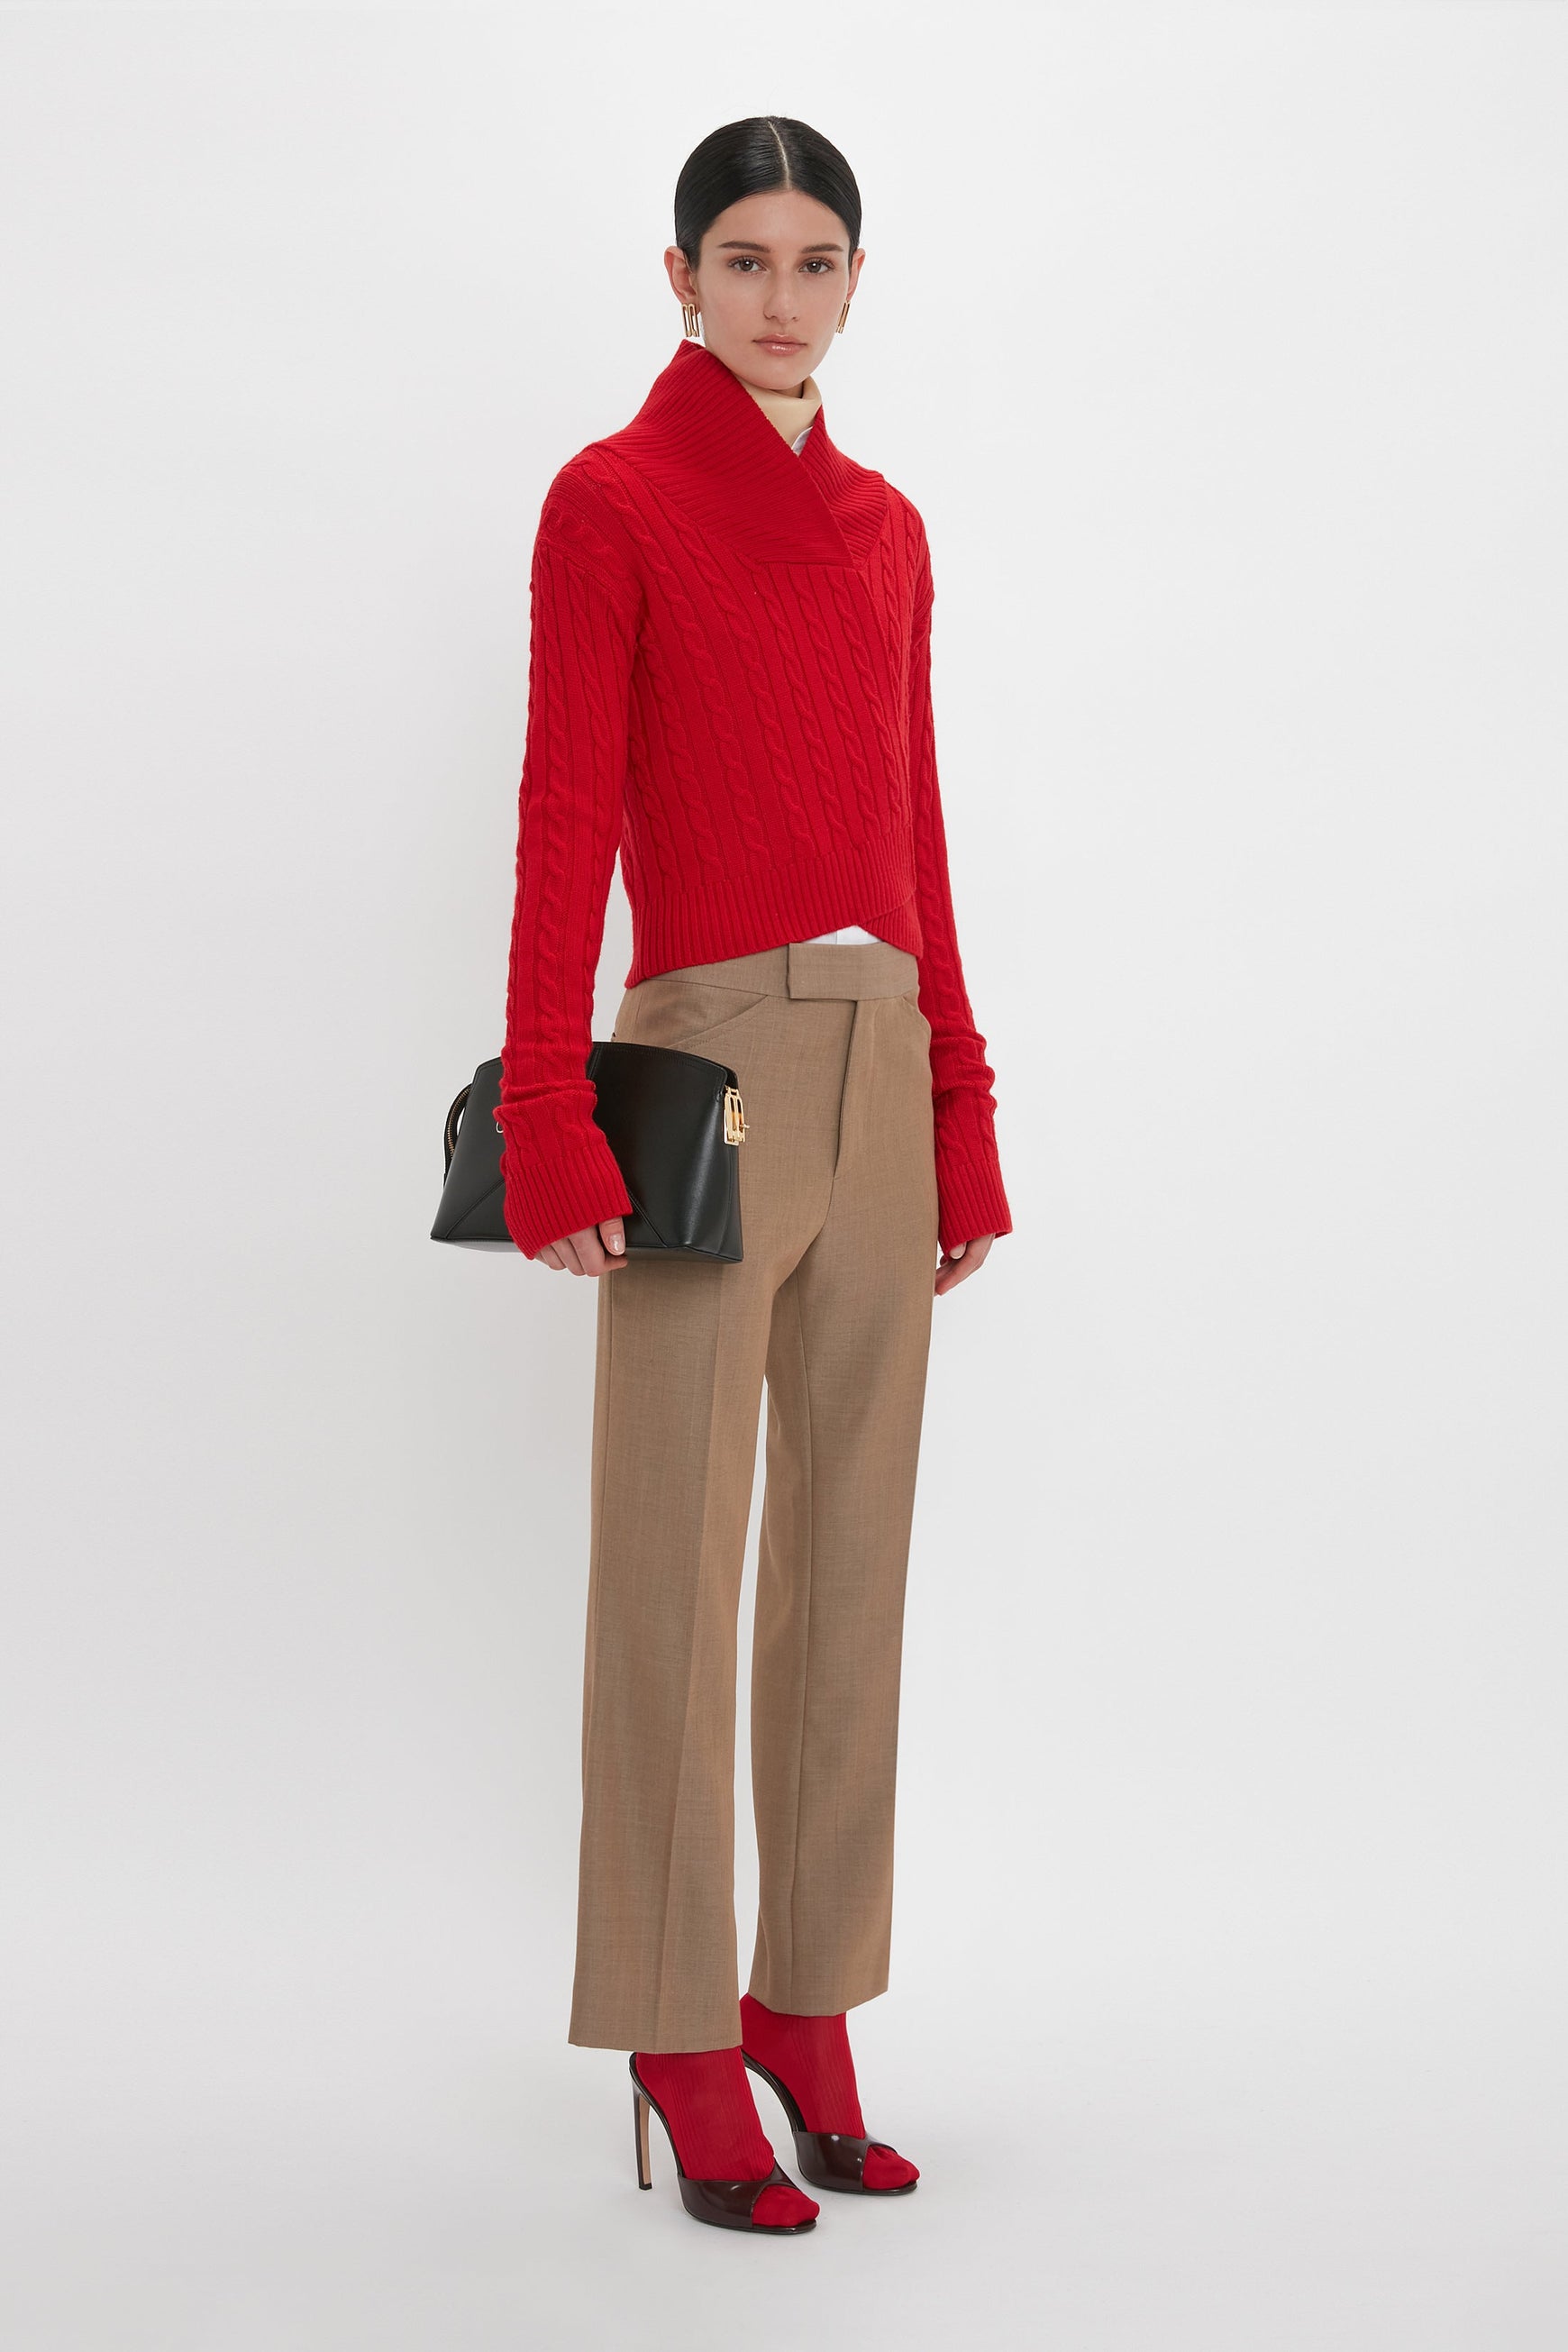 A person stands against a white background wearing a red sweater, Victoria Beckham Wide Cropped Flare Trouser In Tobacco, red shoes that reveal a flattering hint of ankle, and holding a black clutch.